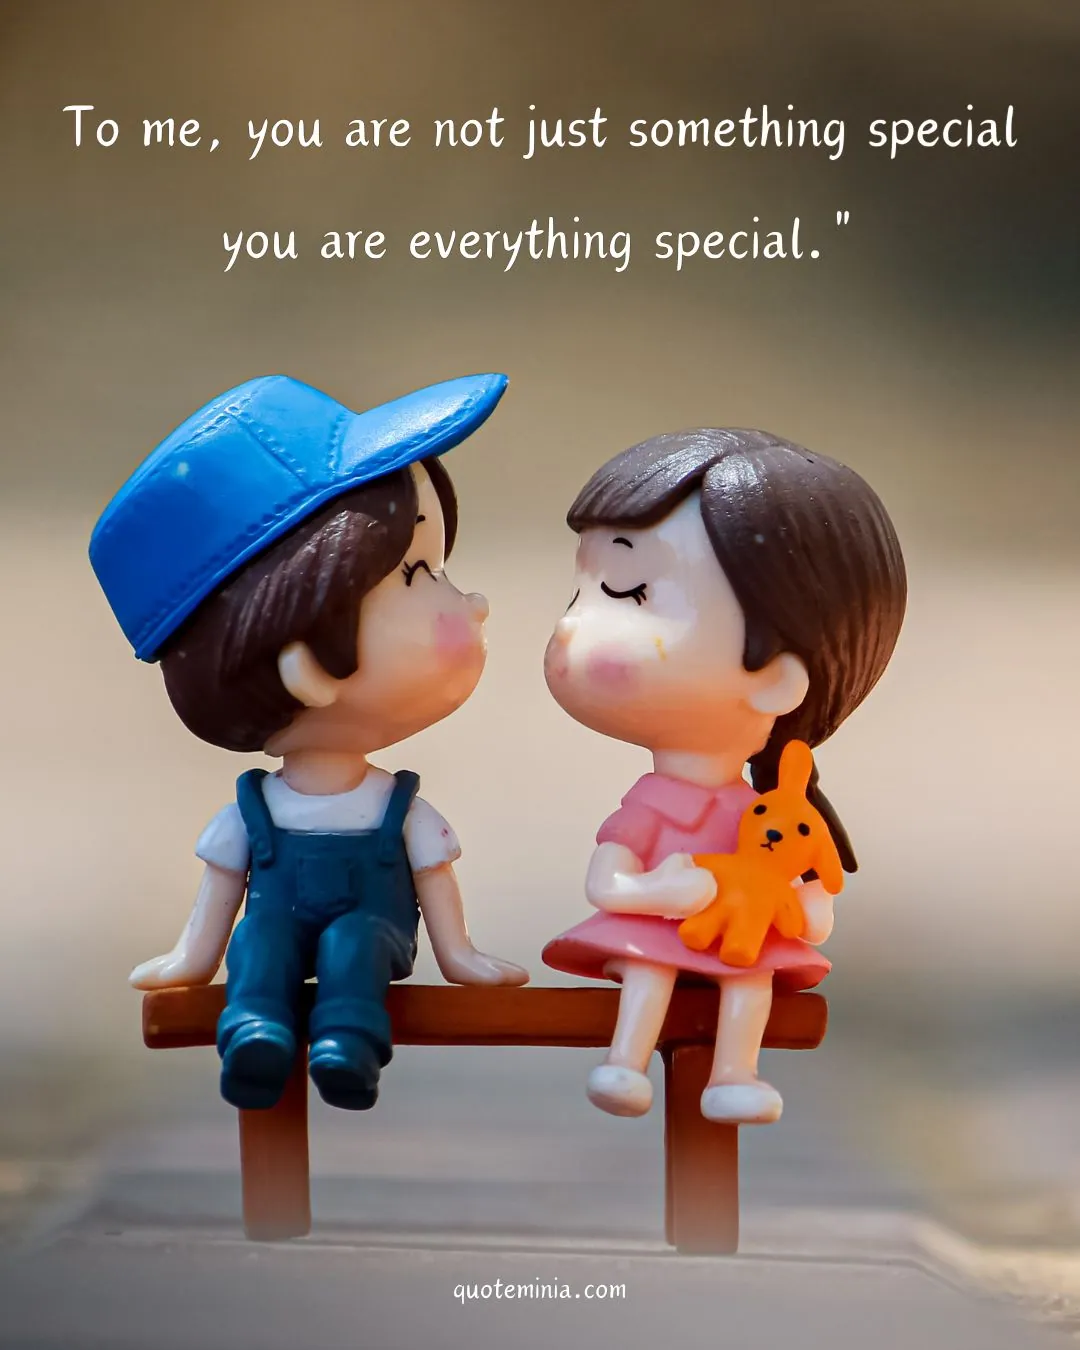 You Are Something Special to Me Quotes Image